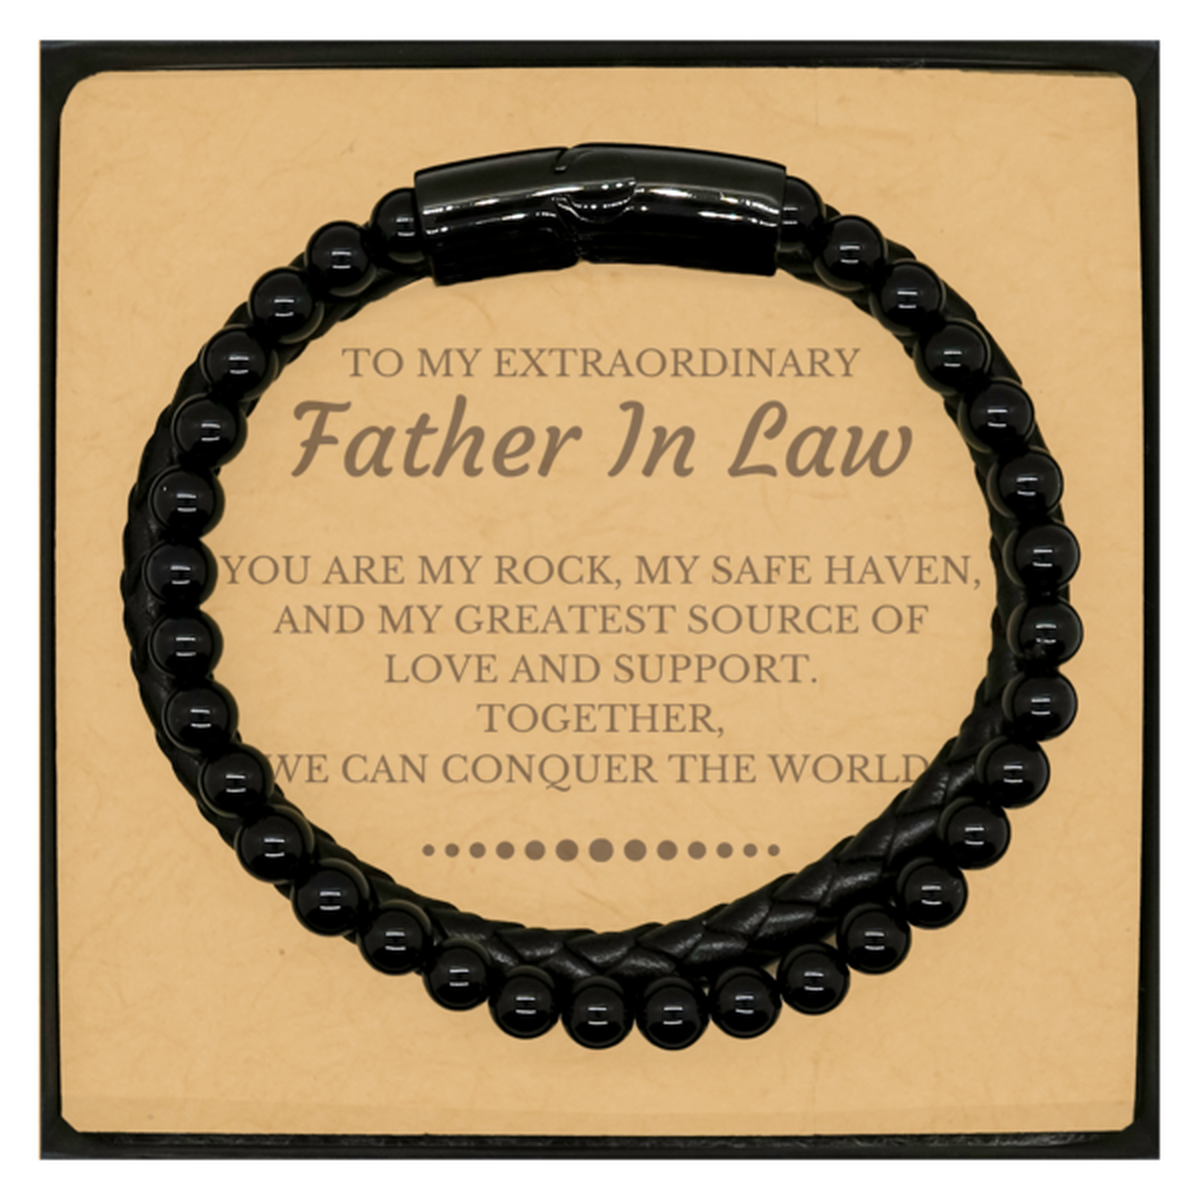 To My Extraordinary Father In Law Gifts, Together, we can conquer the world, Birthday Christmas Stone Leather Bracelets For Father In Law, Christmas Gifts For Father In Law